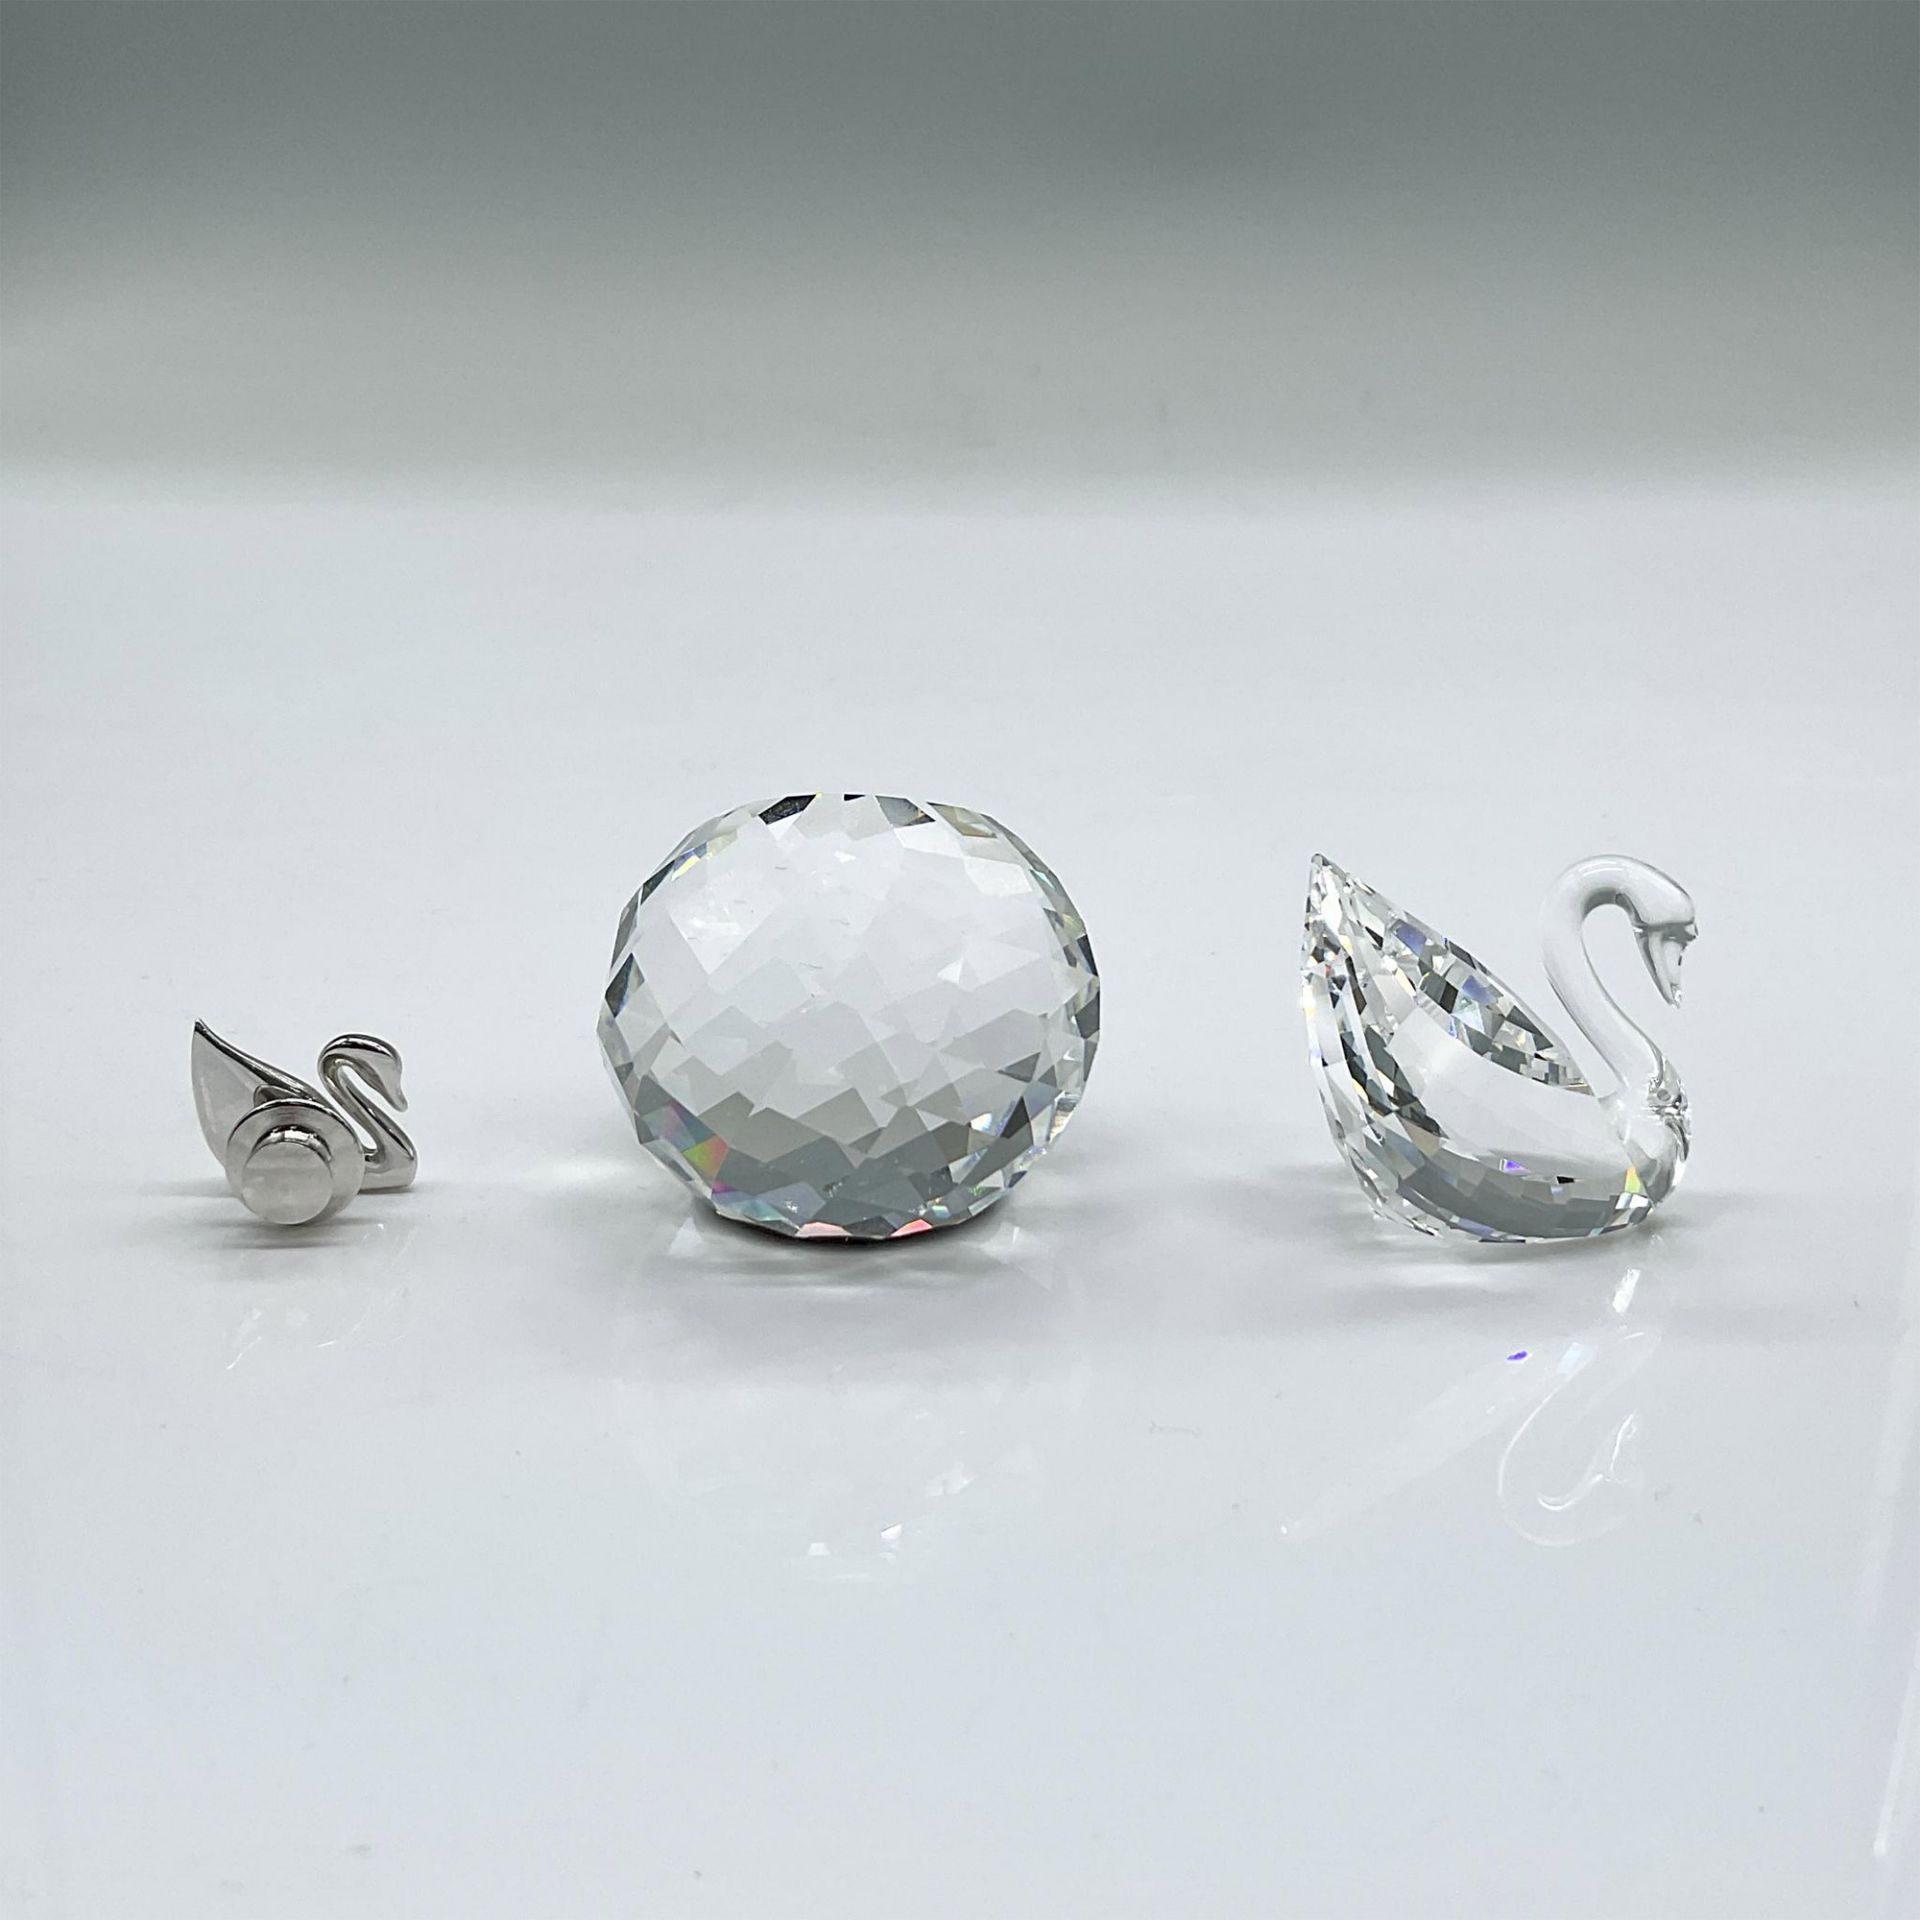 3pc Swarovski Crystal Swan, Paperweight and Brooch Pin - Image 3 of 5